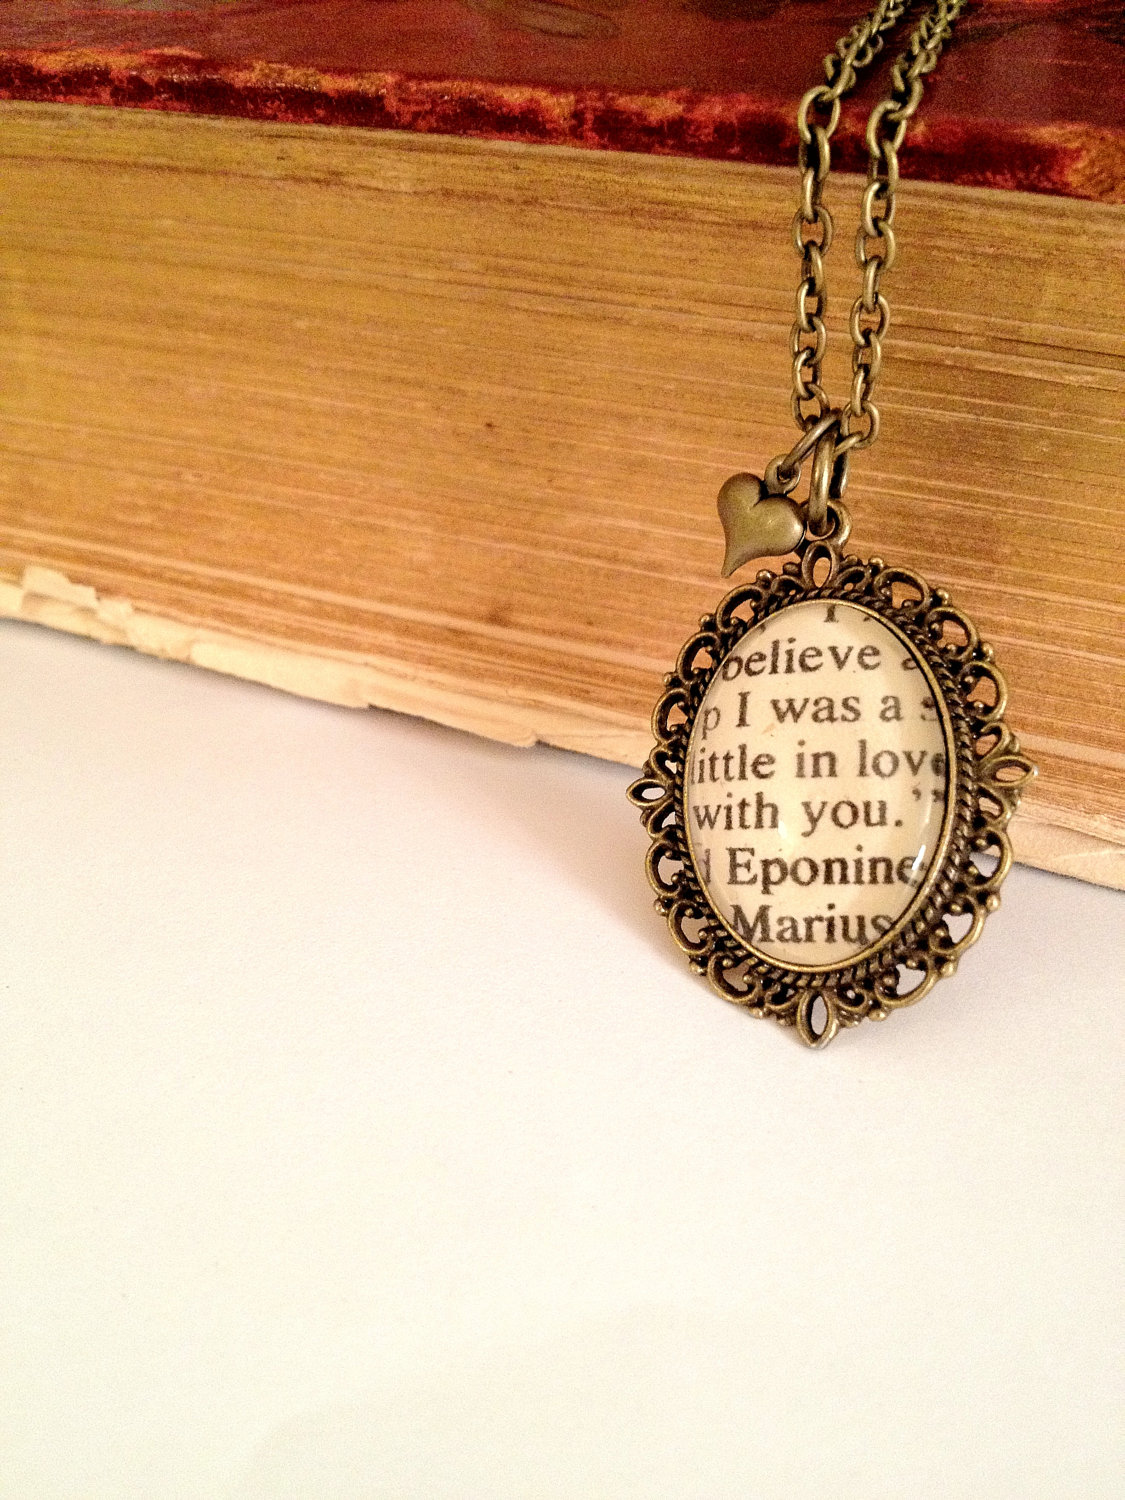 Eponine And Marius From Les Miserables Antiqued Bronze Book Page Necklace